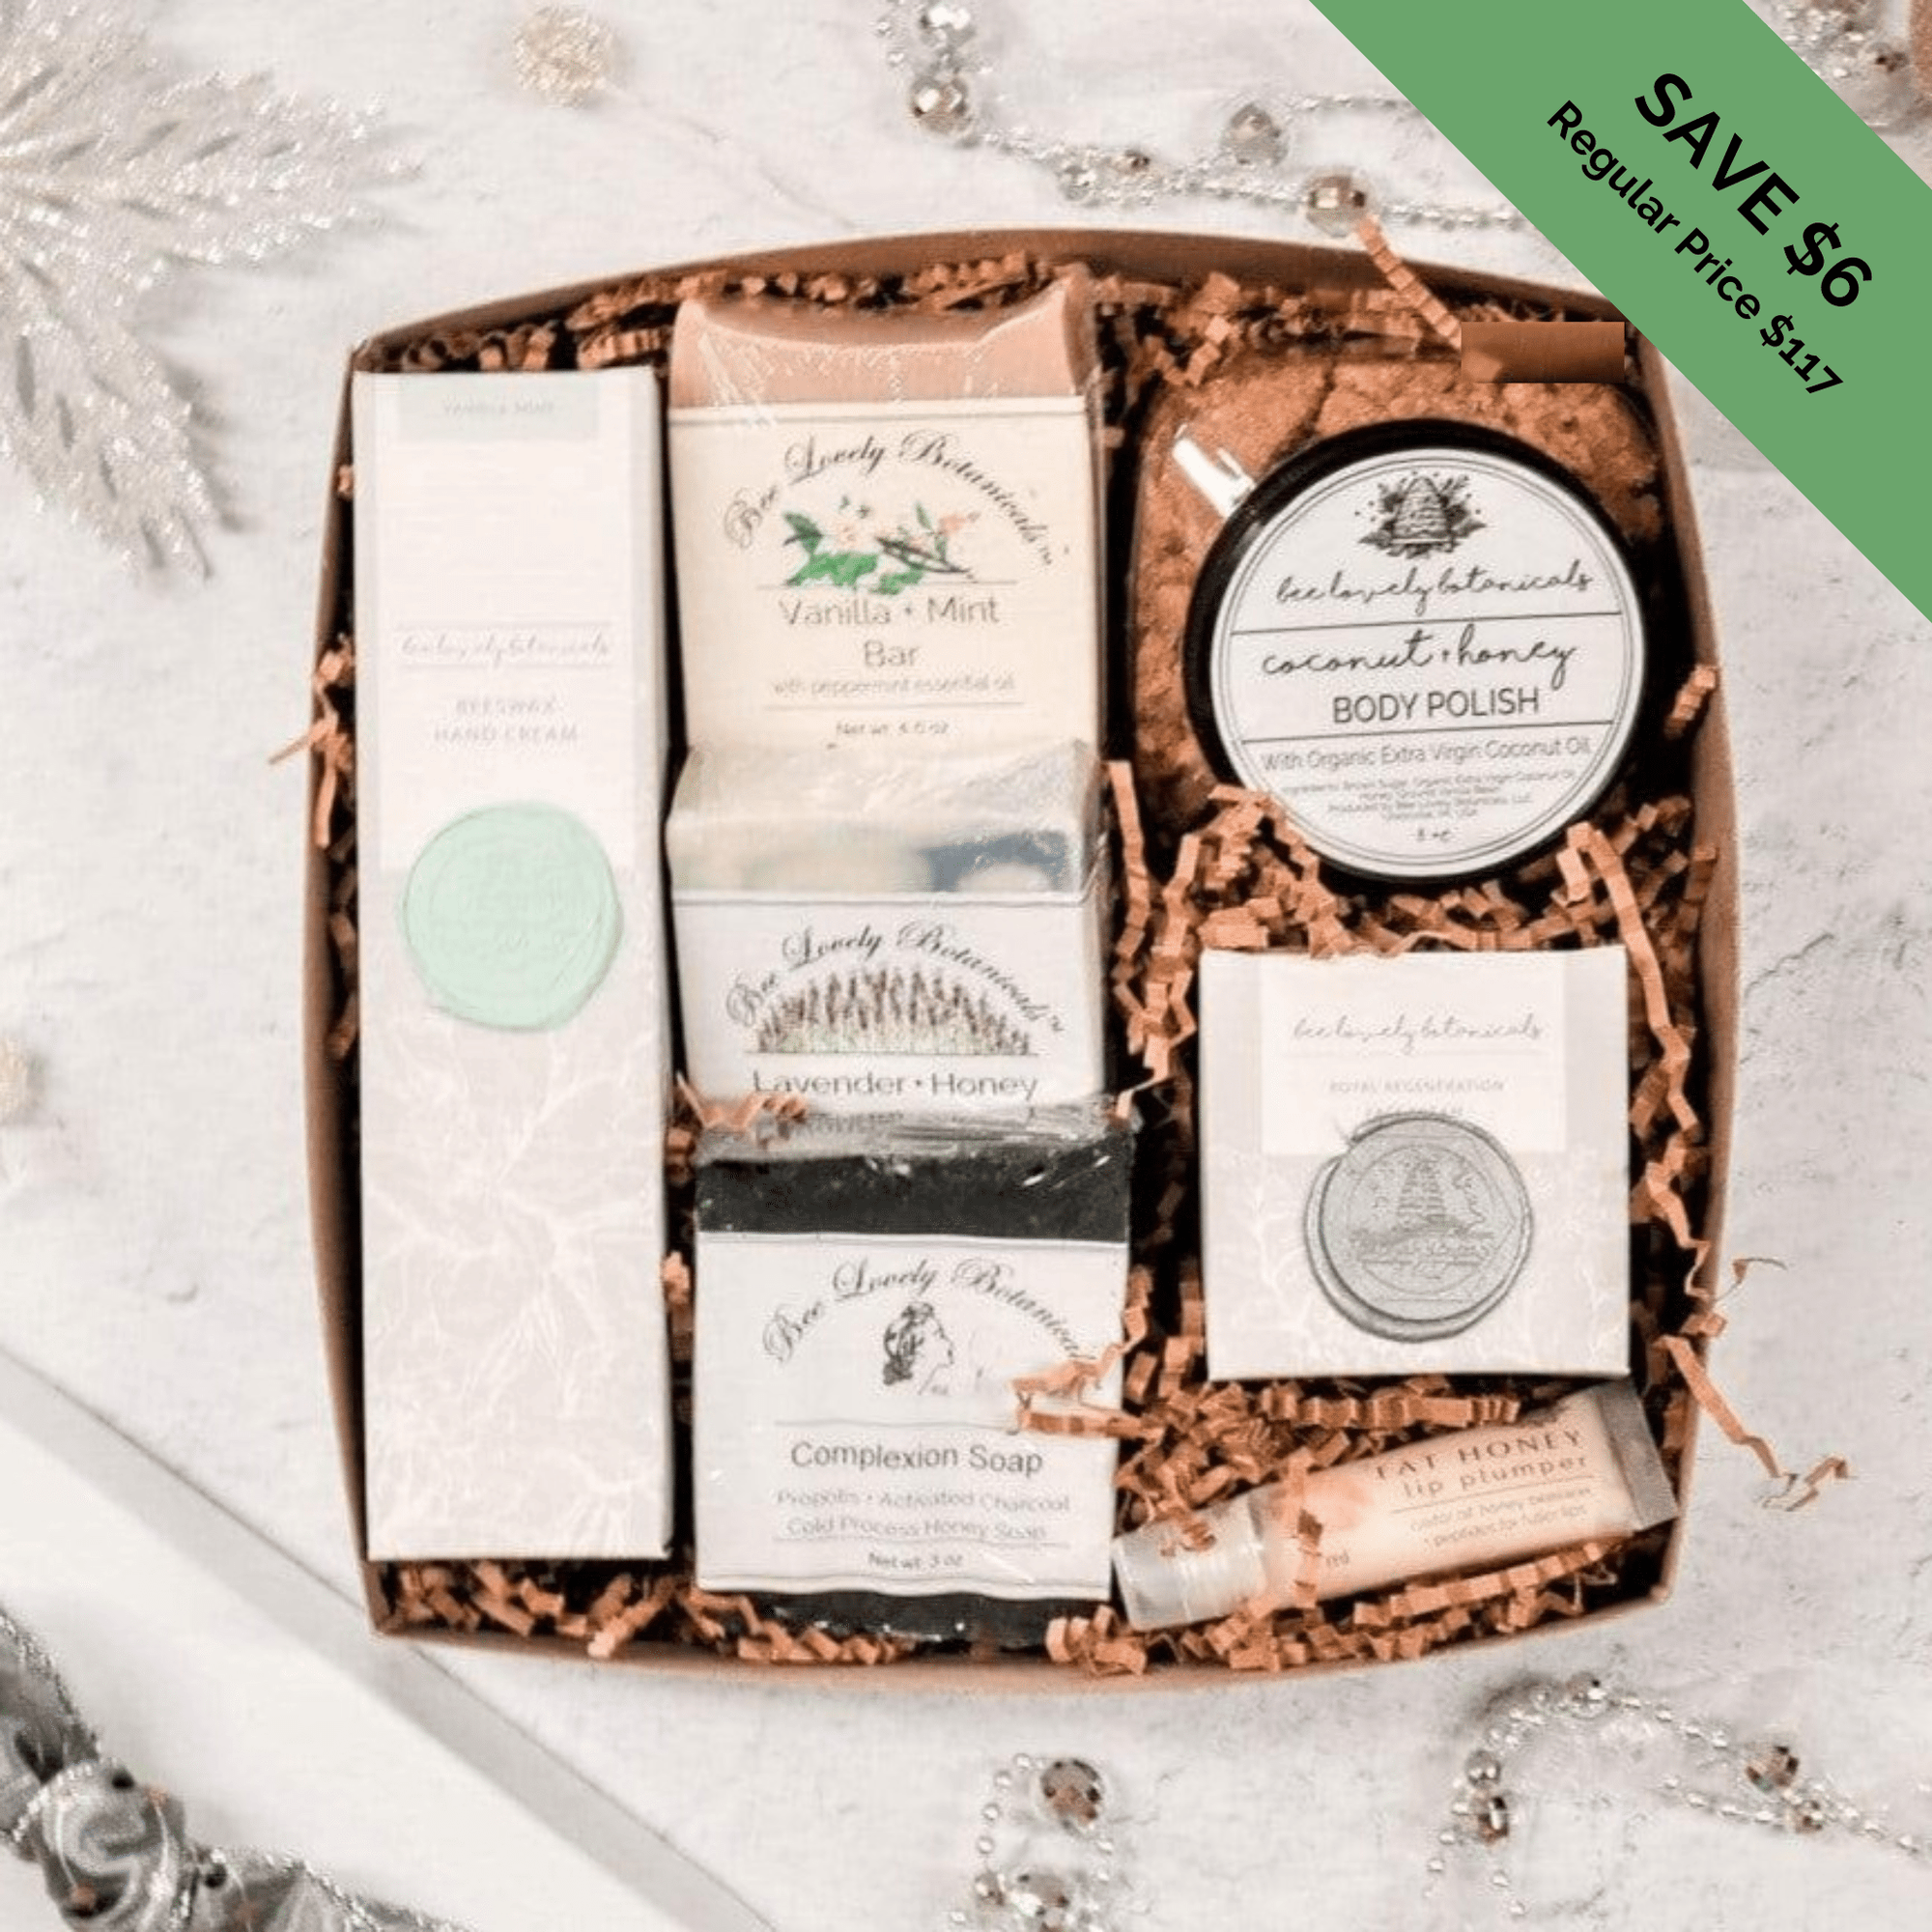 BeeLovelyBotanicals Bath & Body Gift Sets Bee Lovely Botanicals Deluxe Starter Kit with beeswax hand cream, royal jelly face cream, sugar and honey body scrub, lip plumper, honey soap, and propolis soap